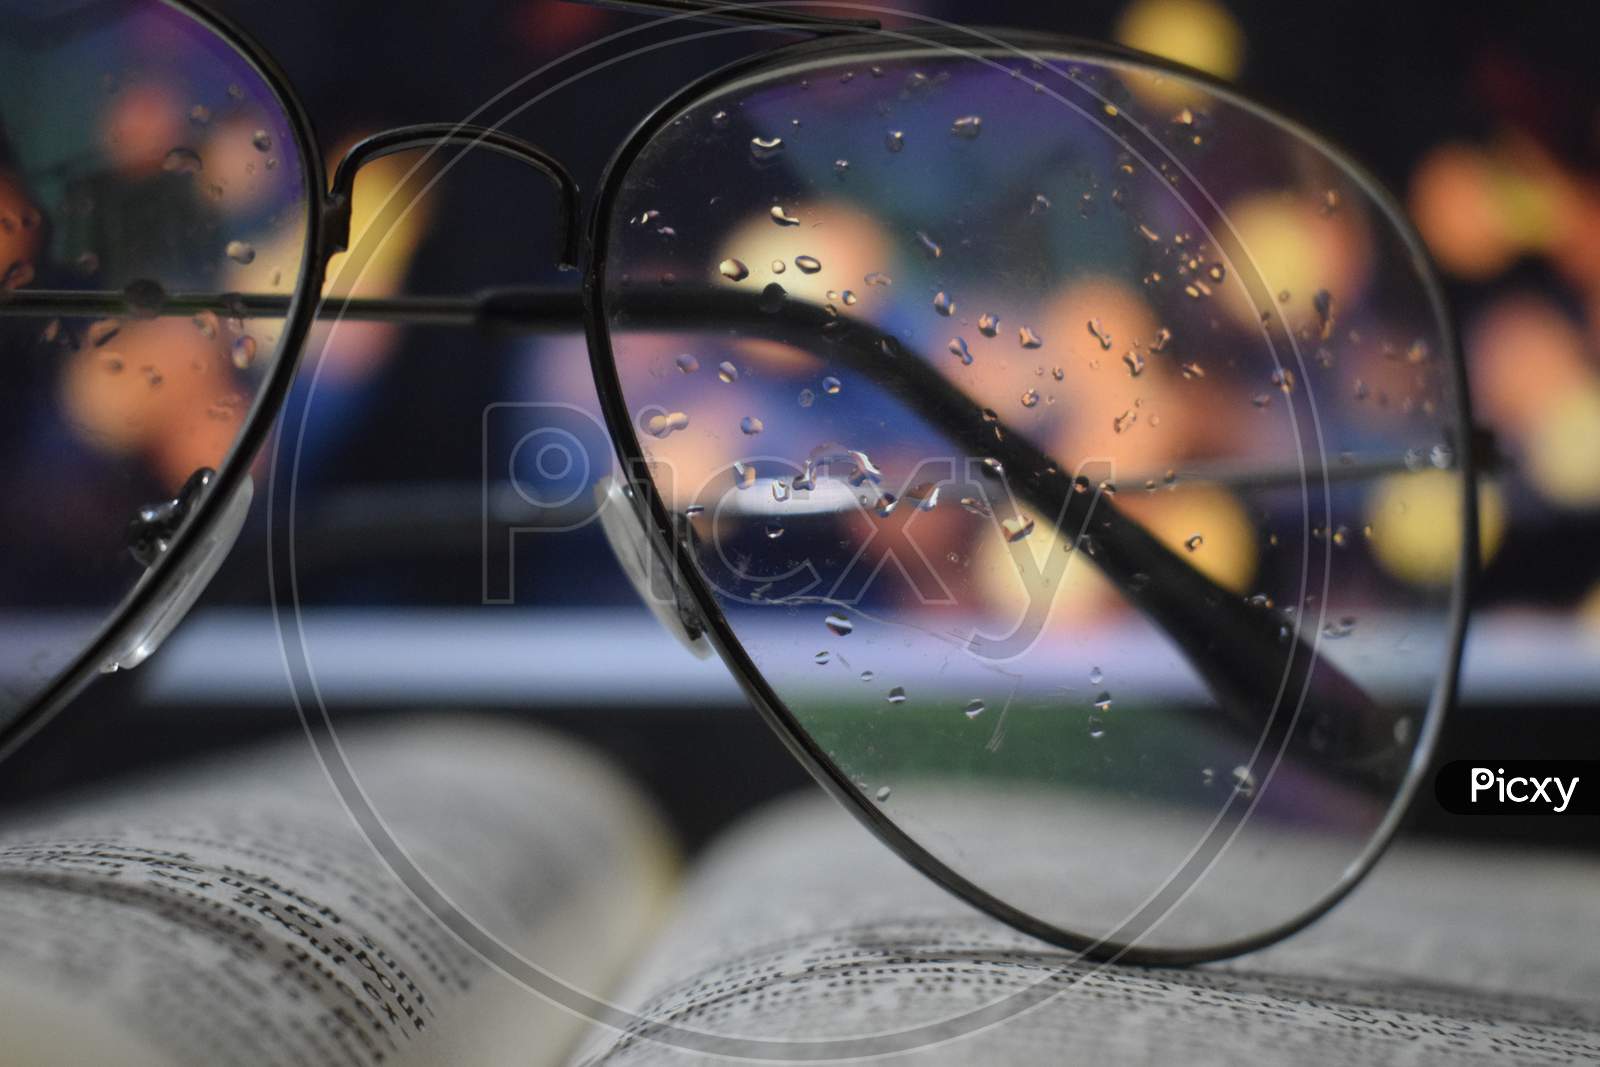 glasses with water drops on it